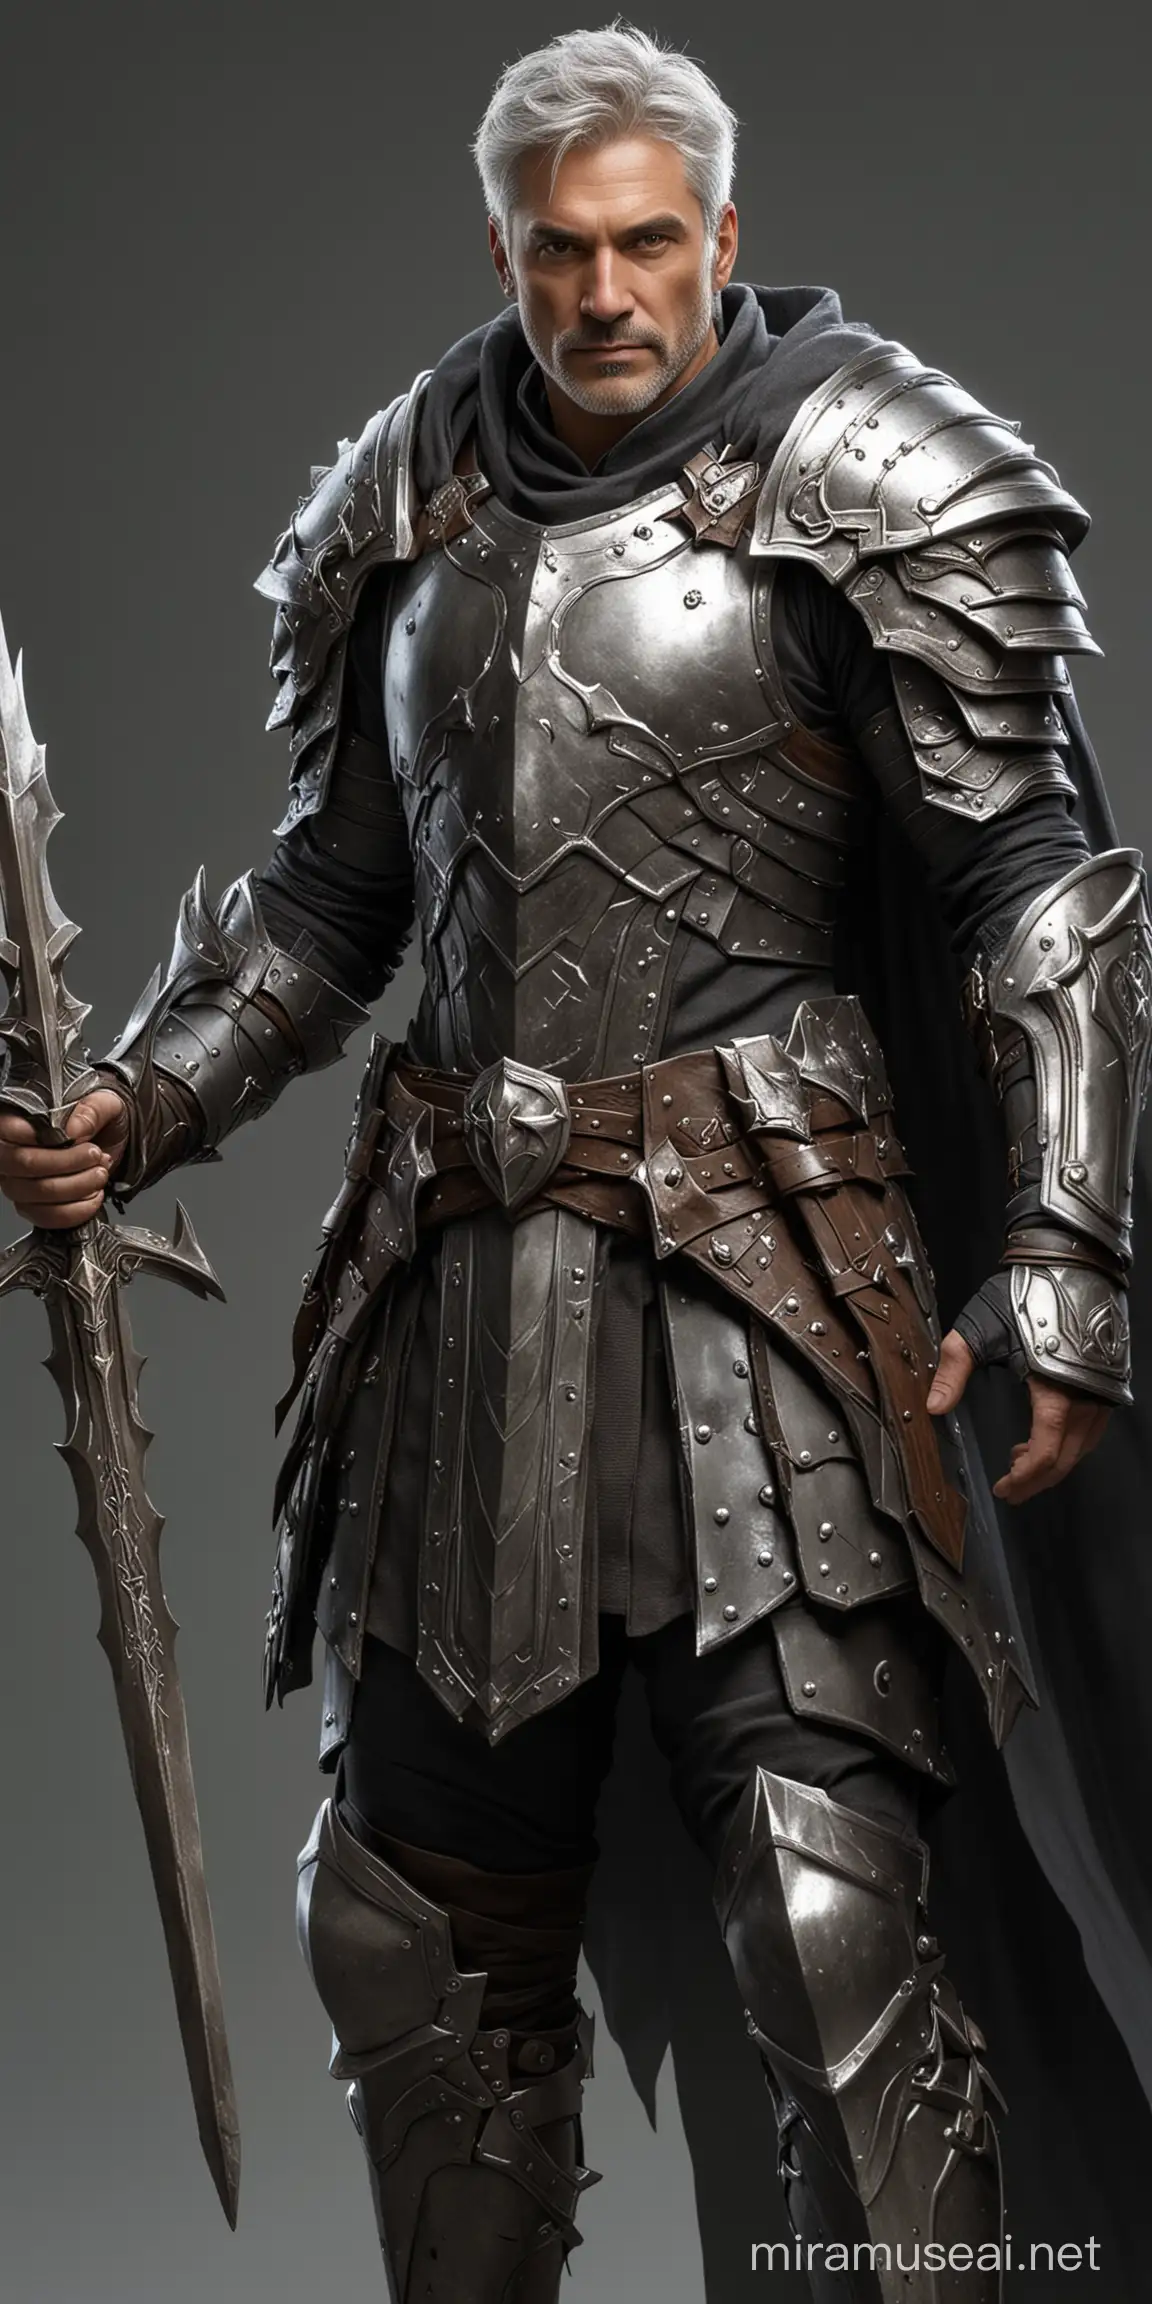 Handsome 50YearOld Human Paladin in Heavy Armor with Halberd and Shield